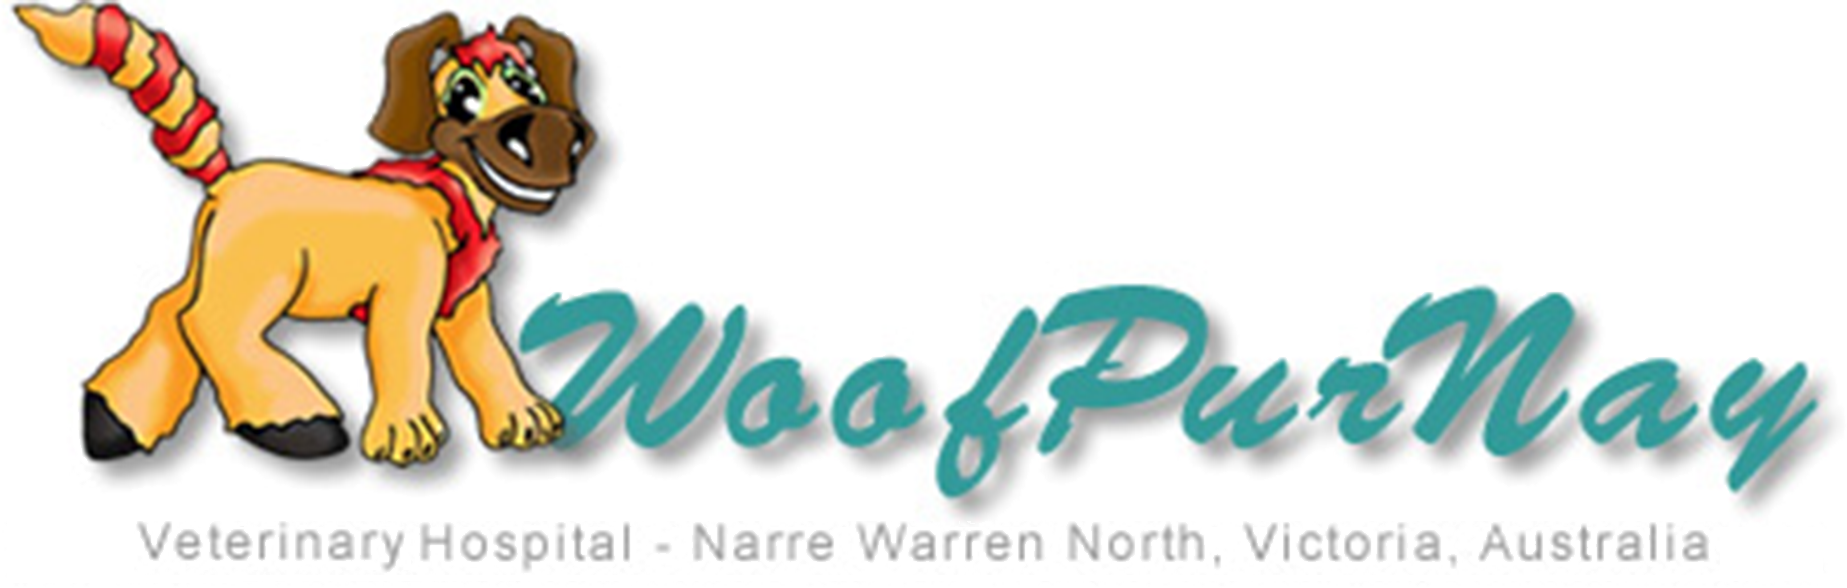 Woofpurnay Veterinary Hospital | Professional compassionate care | Emergency Vet